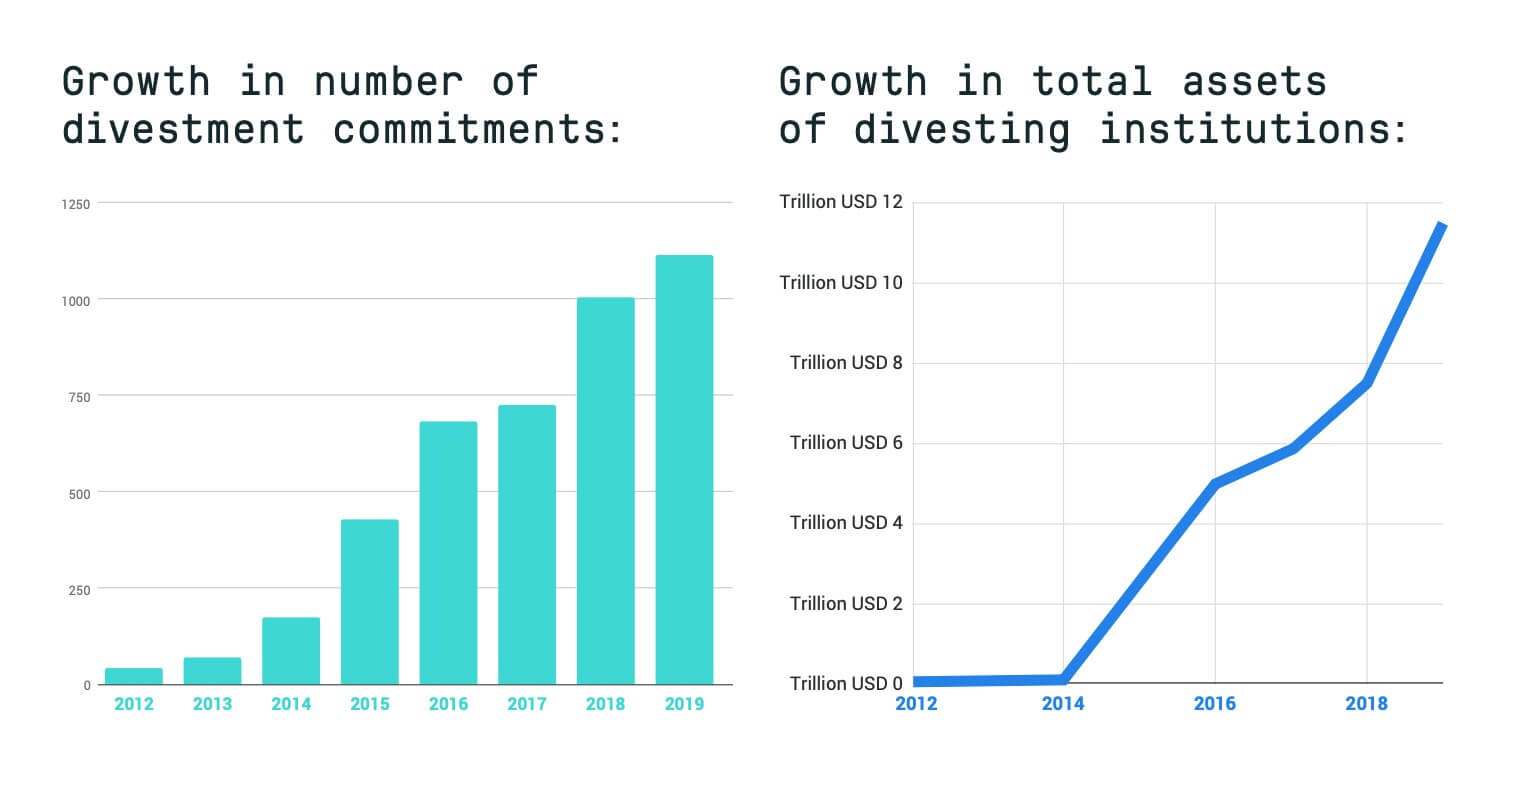 Two charts showing the number of divestment commitments and total assets